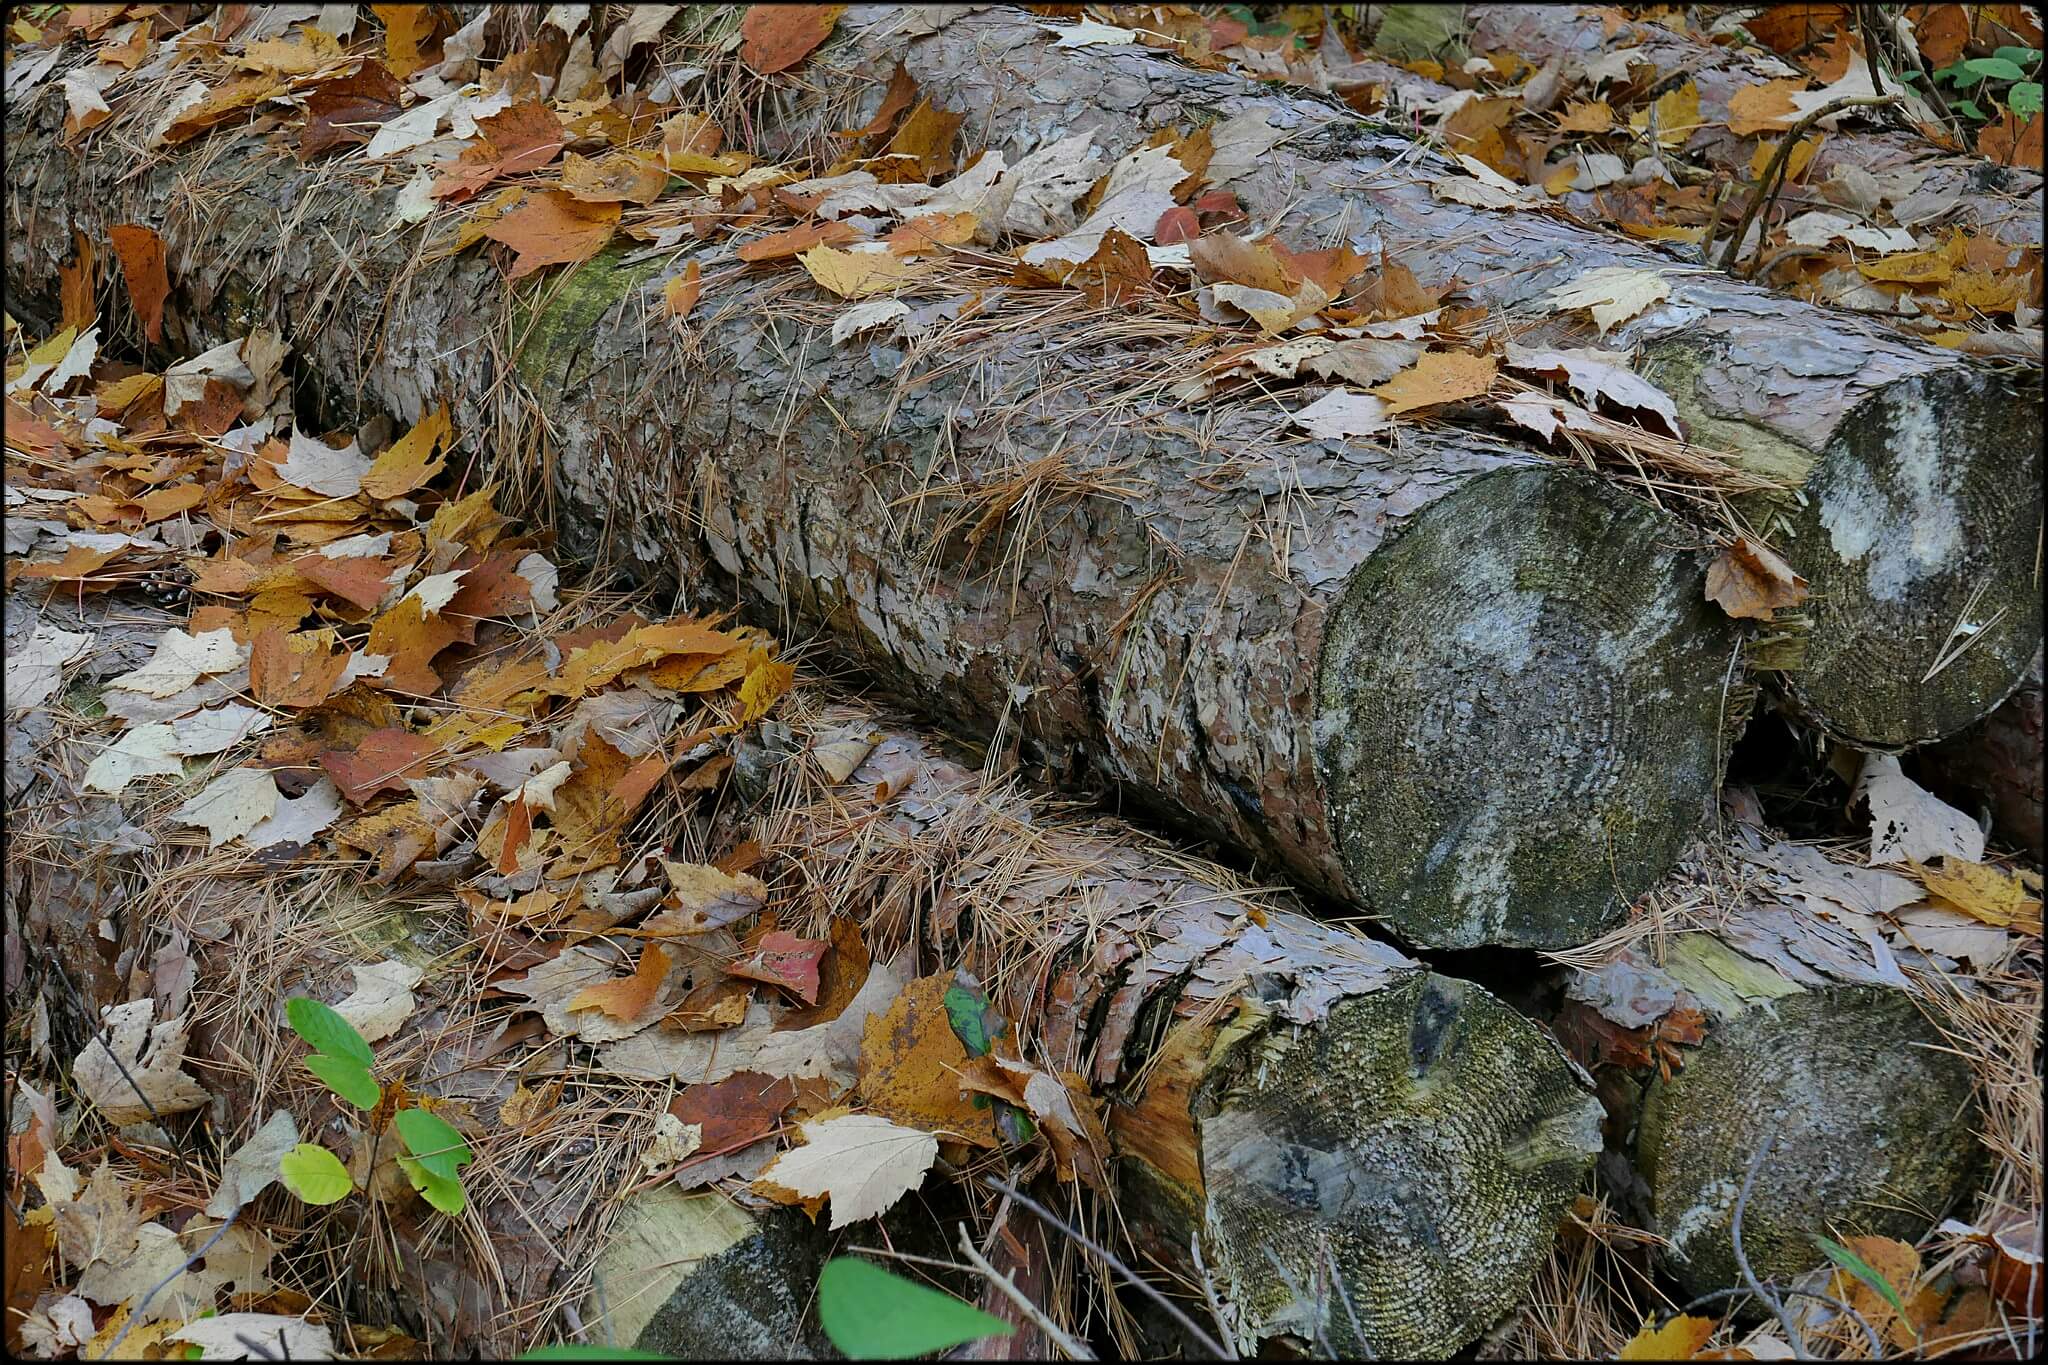 A pile of neatly stacked logs covered in autumn leaves.